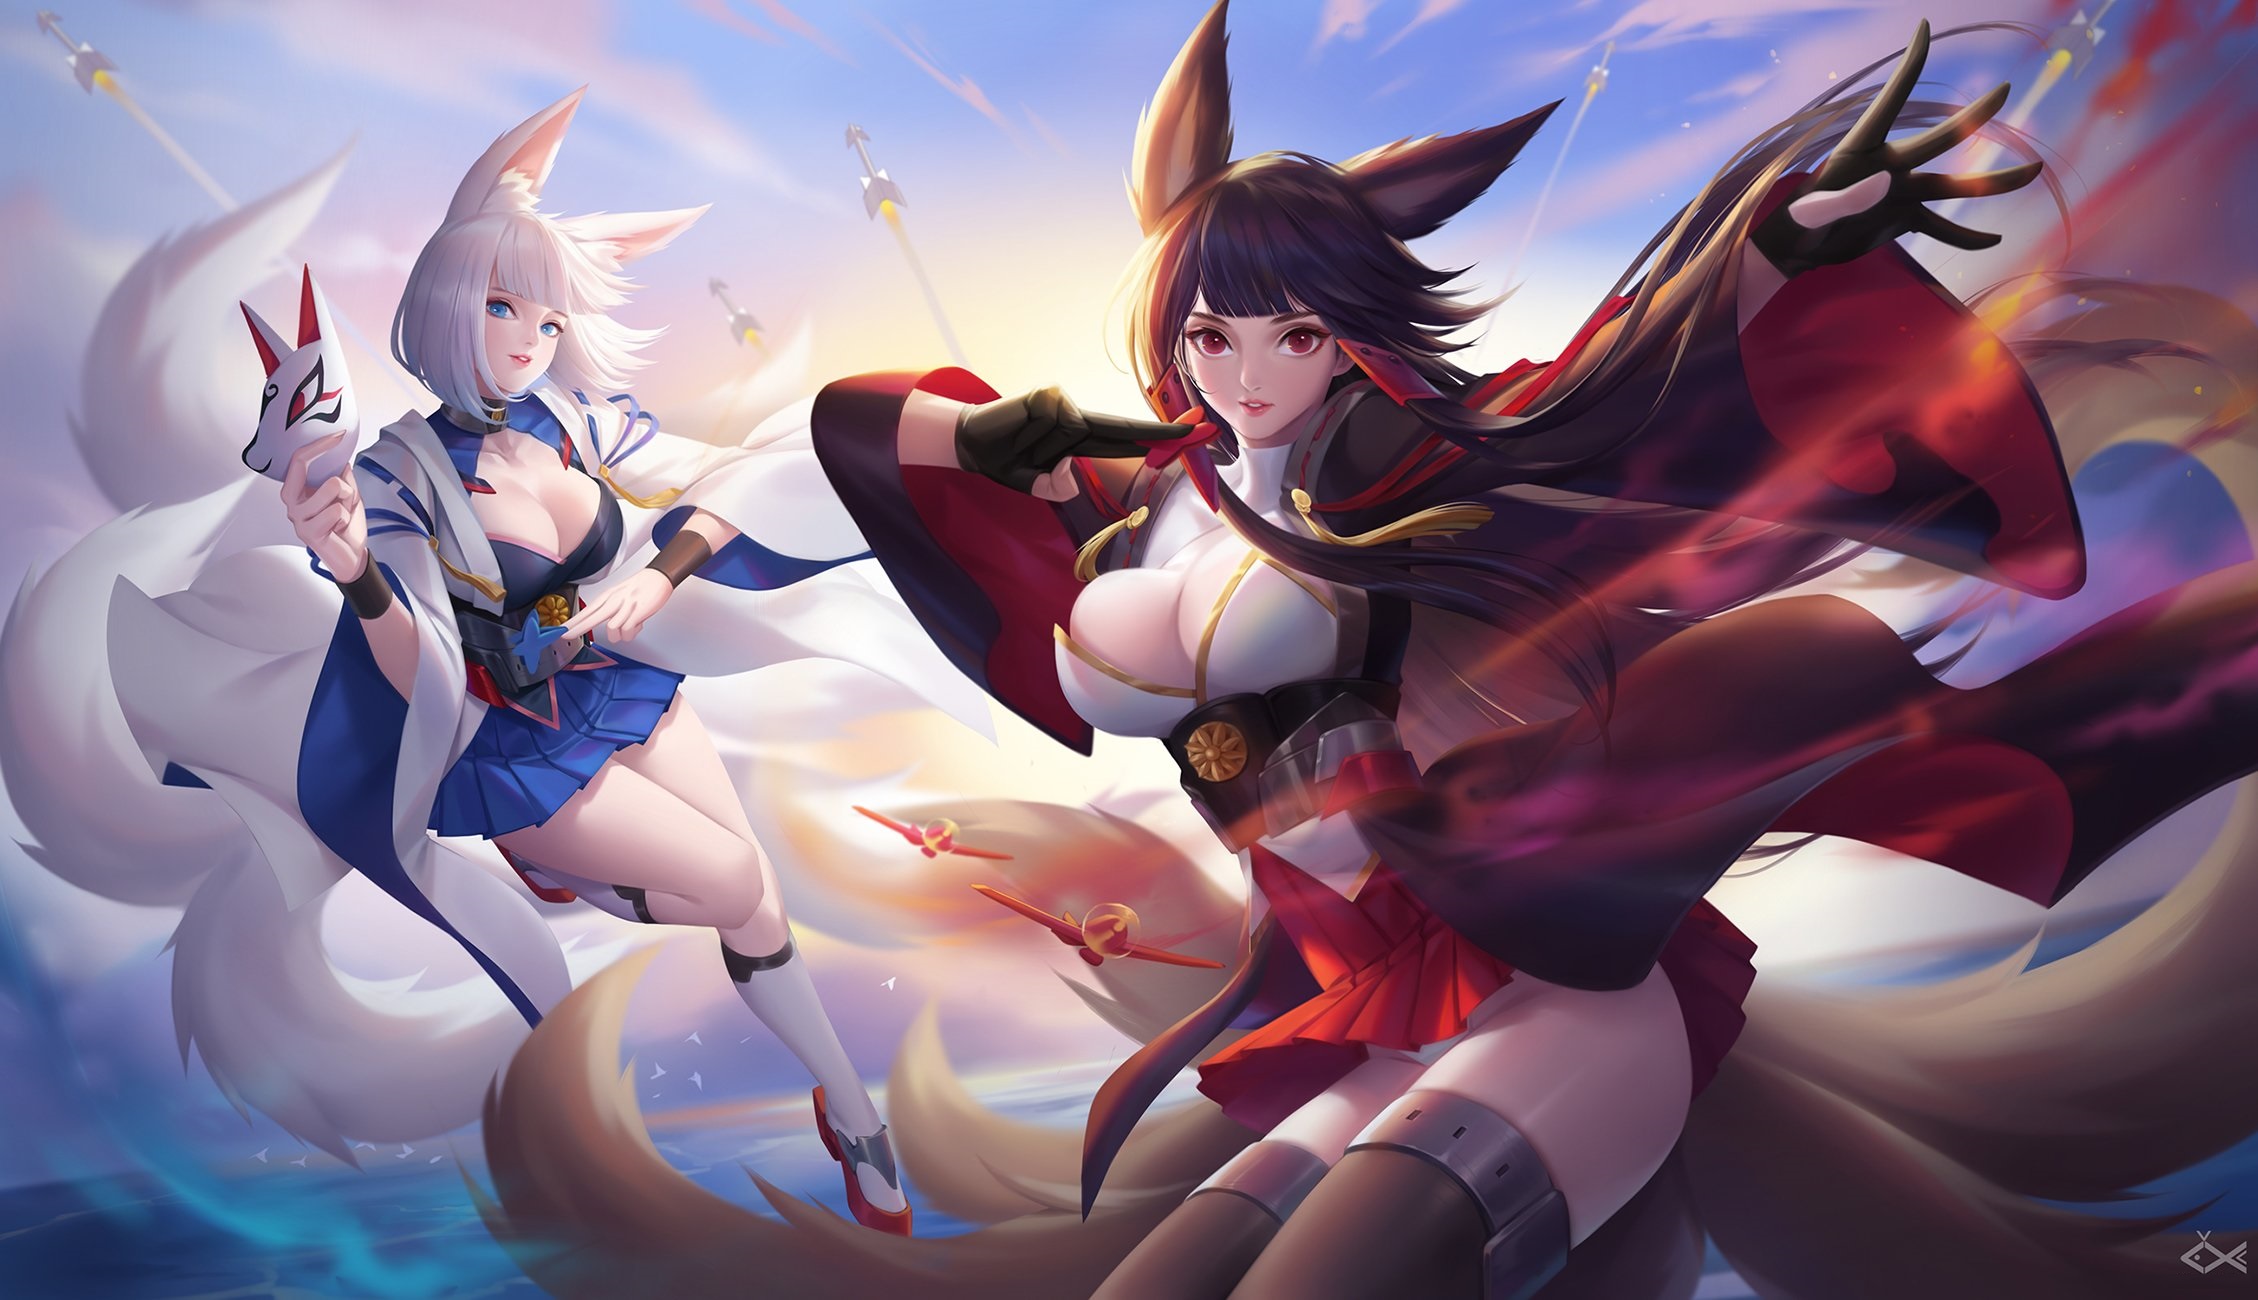 1920x1080 Azur Lane Wallpaper Background Image View download comment  and rate  Wallpaper Abyss  Anime Animation art character design Belfast